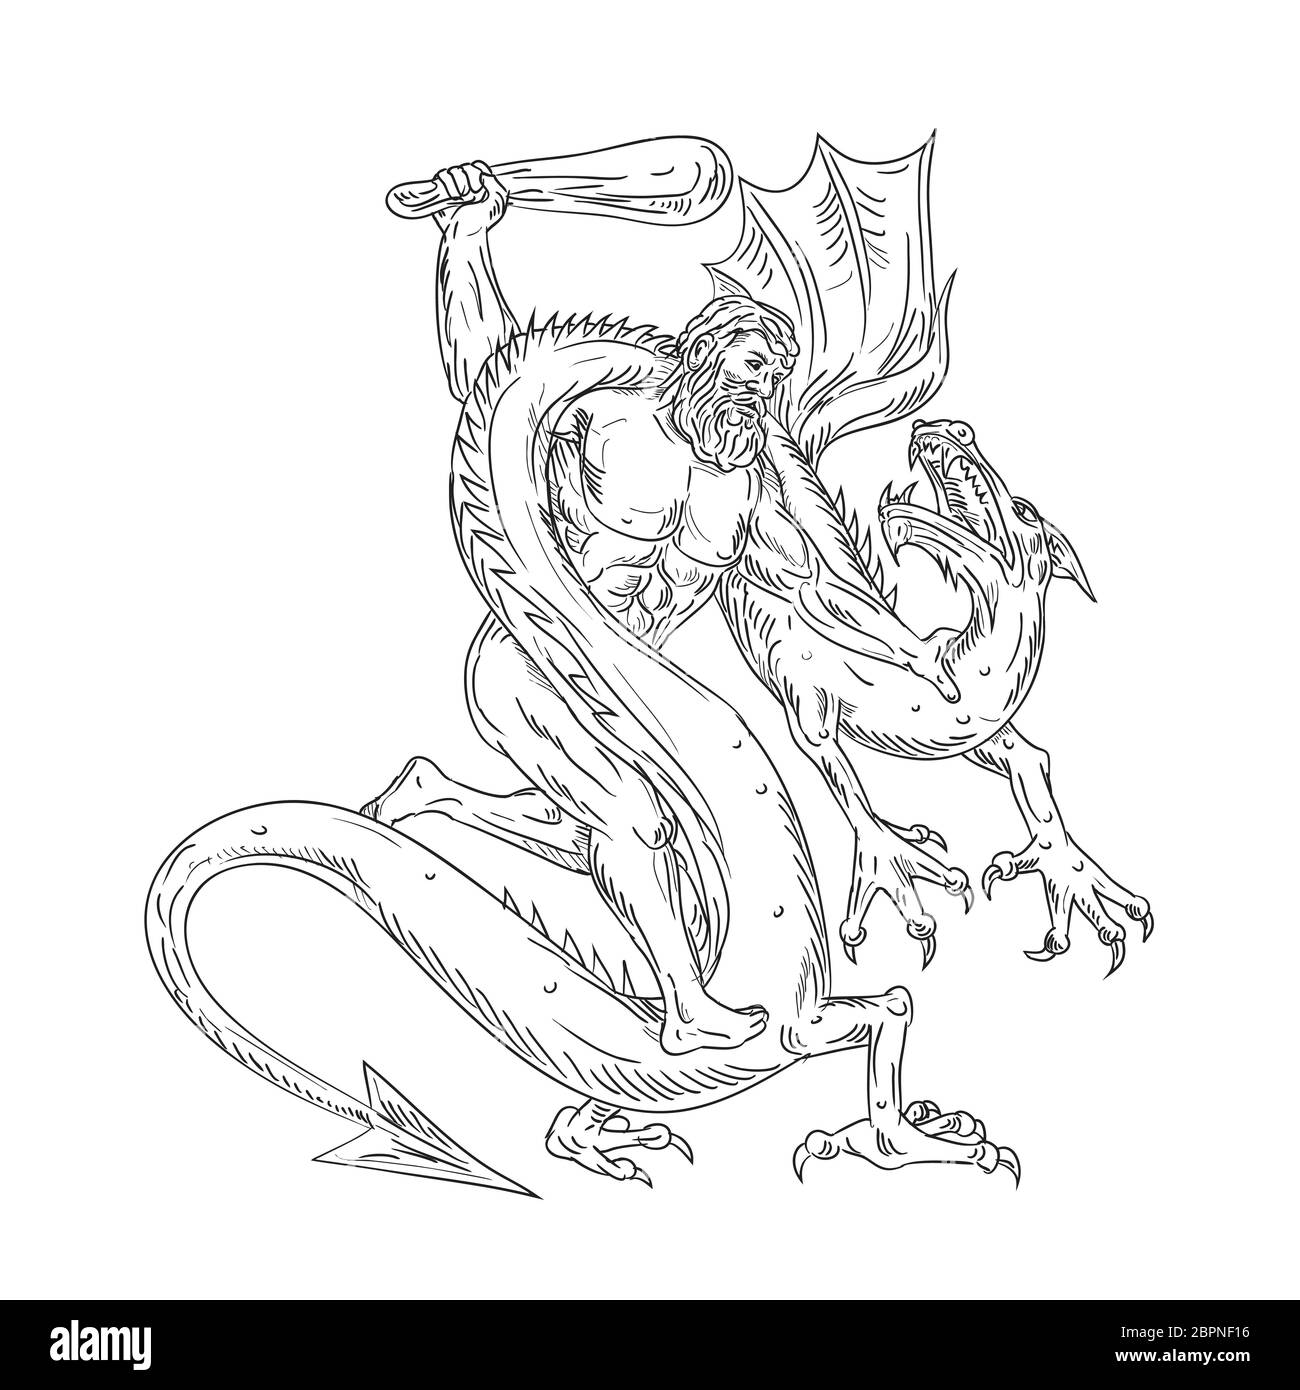 Drawing sketch style illustration of Hercules, a Roman hero and god the equivalent of the Greek divine hero Heracles, grappling a medieval dragon on i Stock Photo